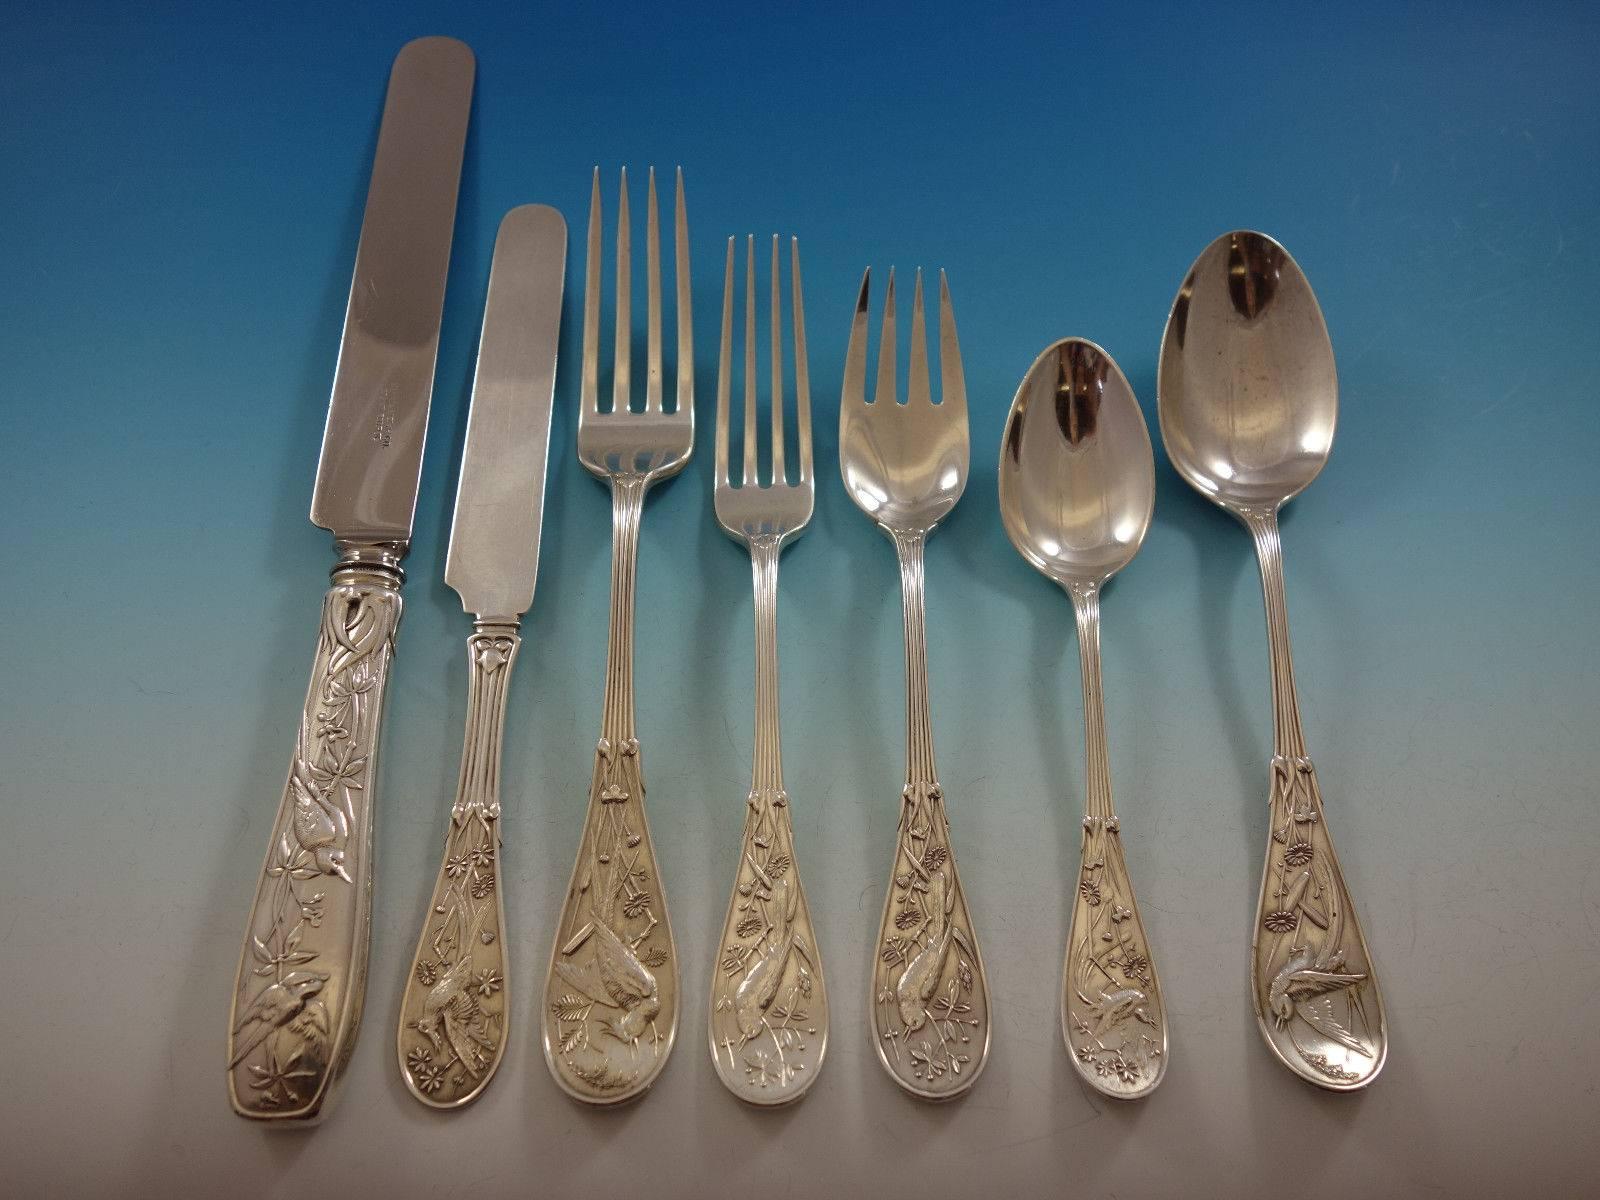 Japanese by tiffany & co. Sterling silver flatware set. This set includes: 8 dinner size knives, 10 1/4